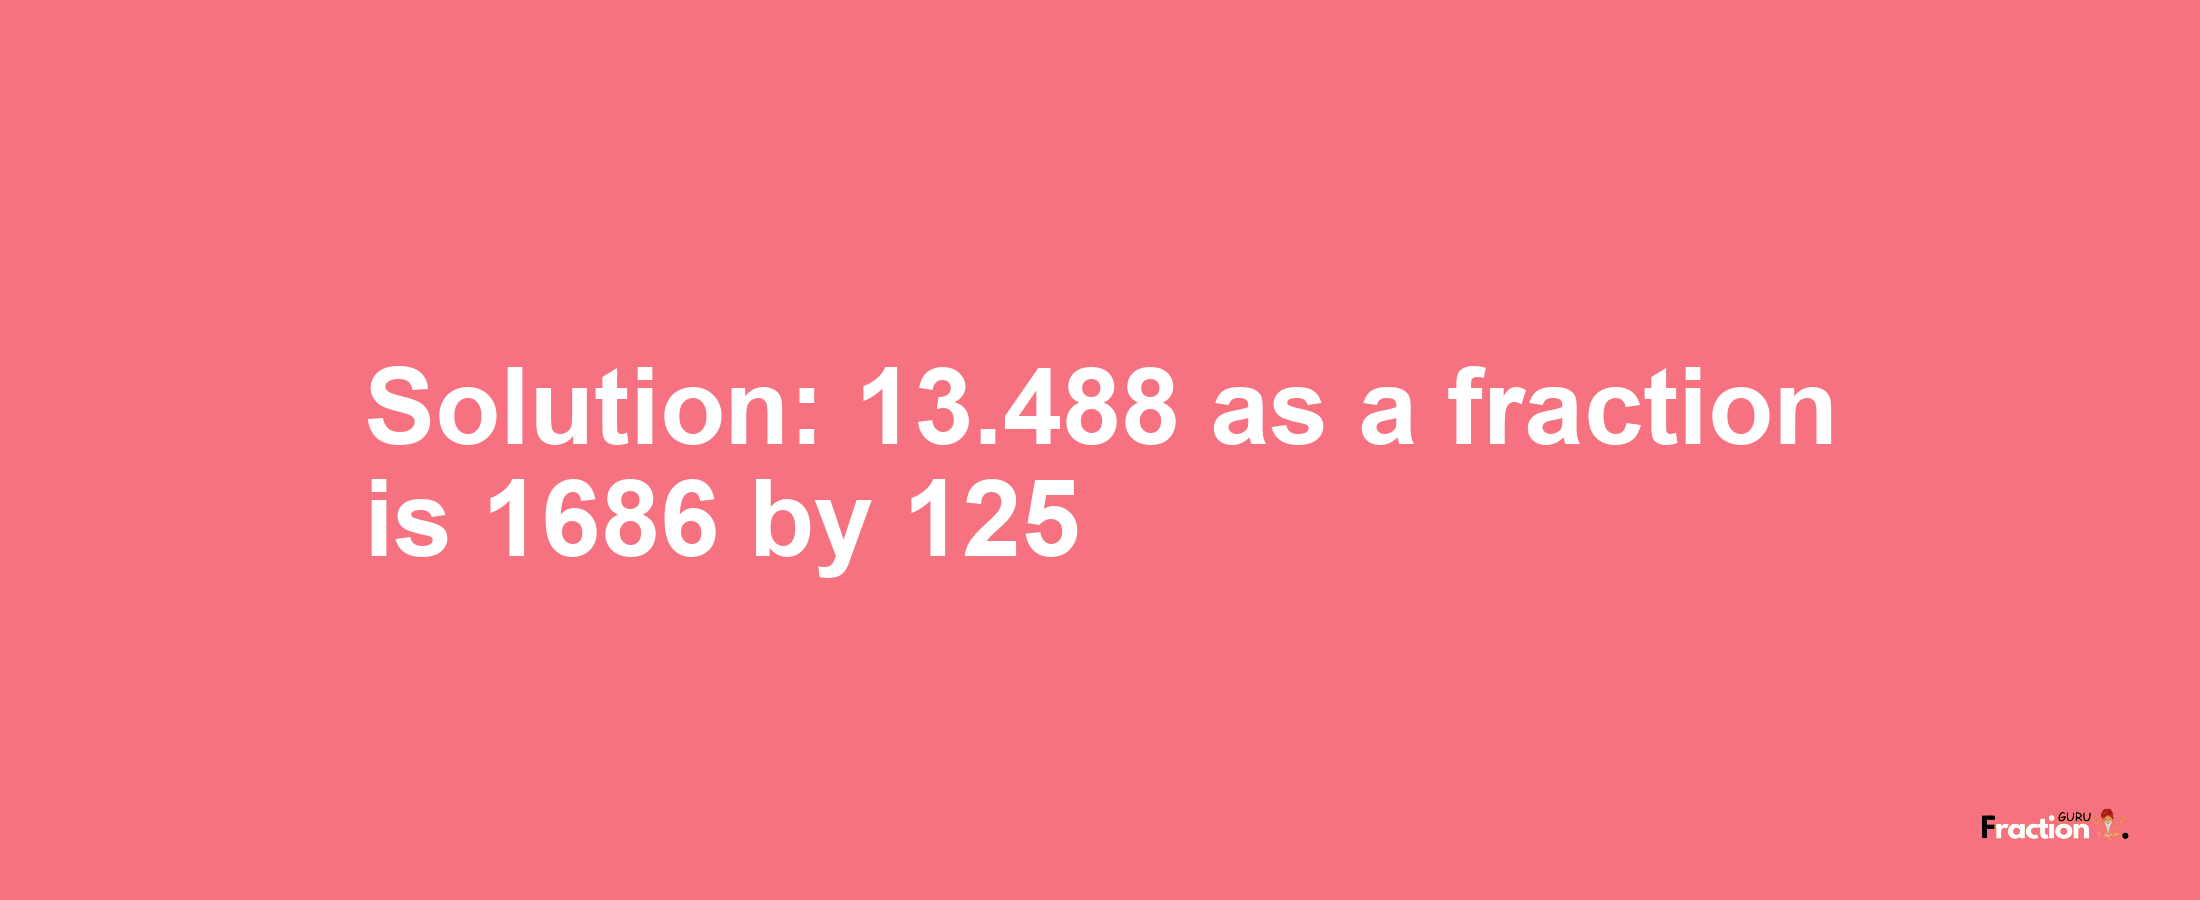 Solution:13.488 as a fraction is 1686/125